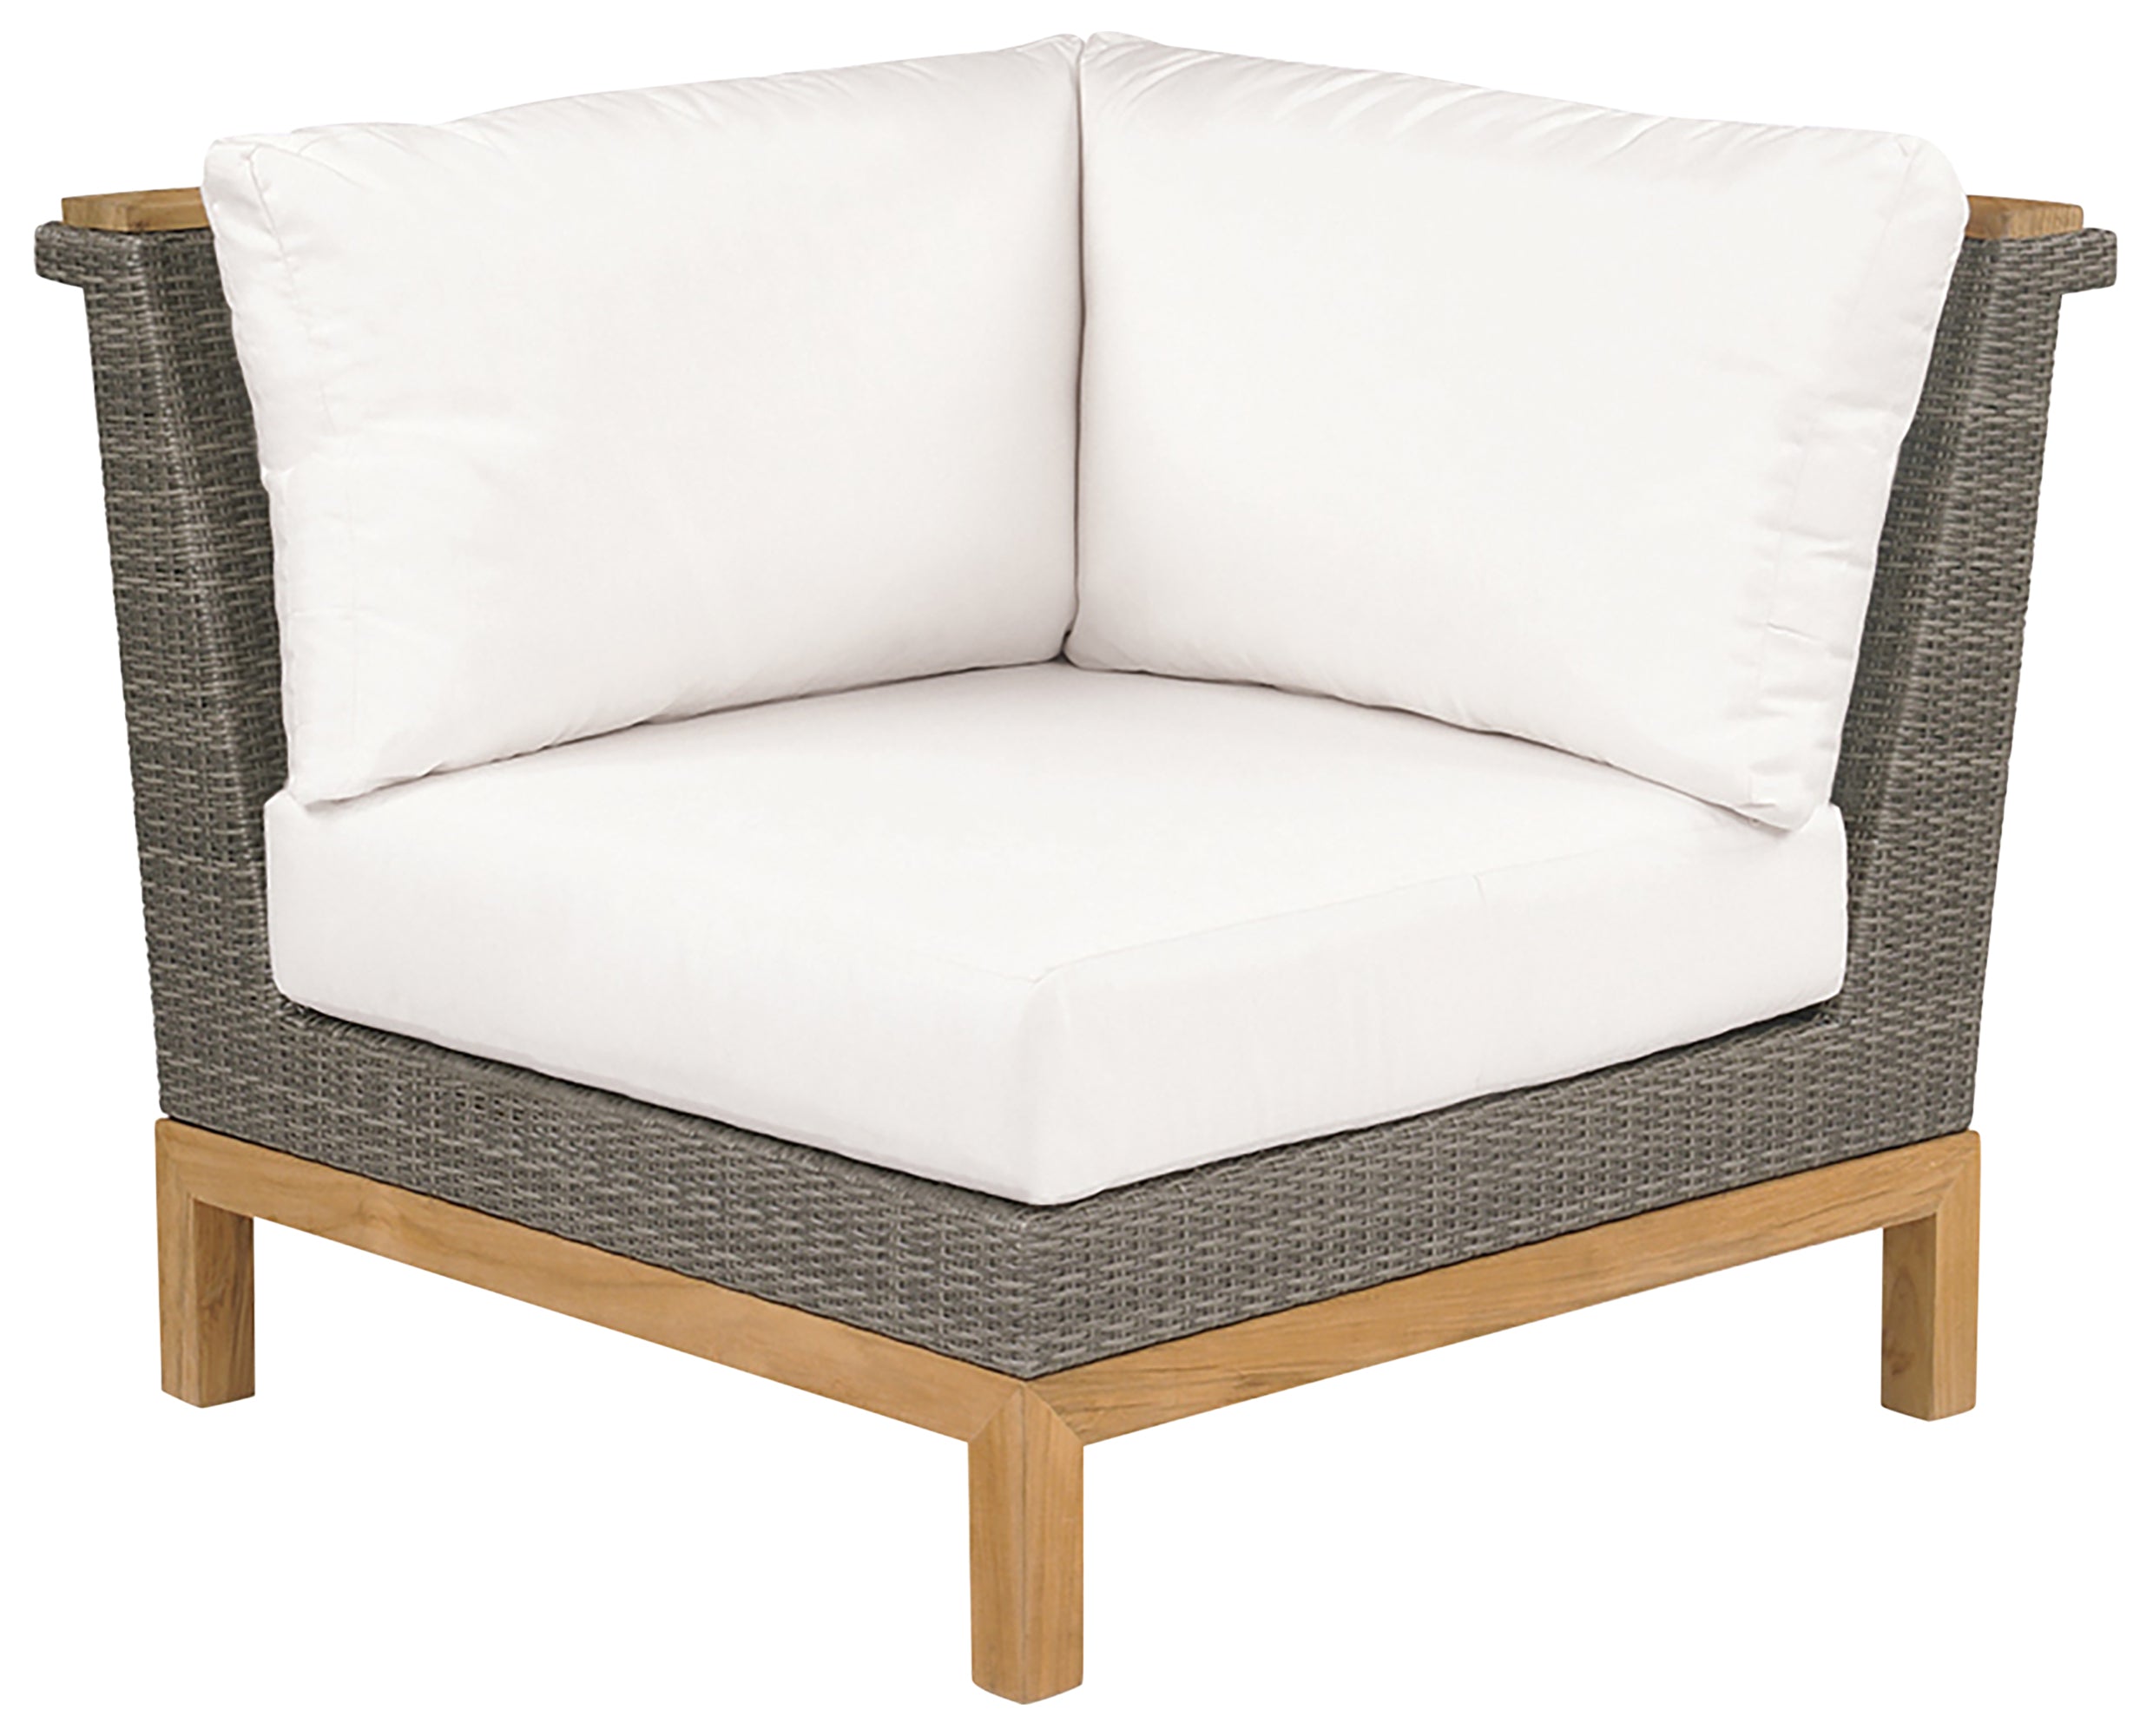 Sectional Corner Chair | Kingsley Bate Azores Collection | Valley Ridge Furniture